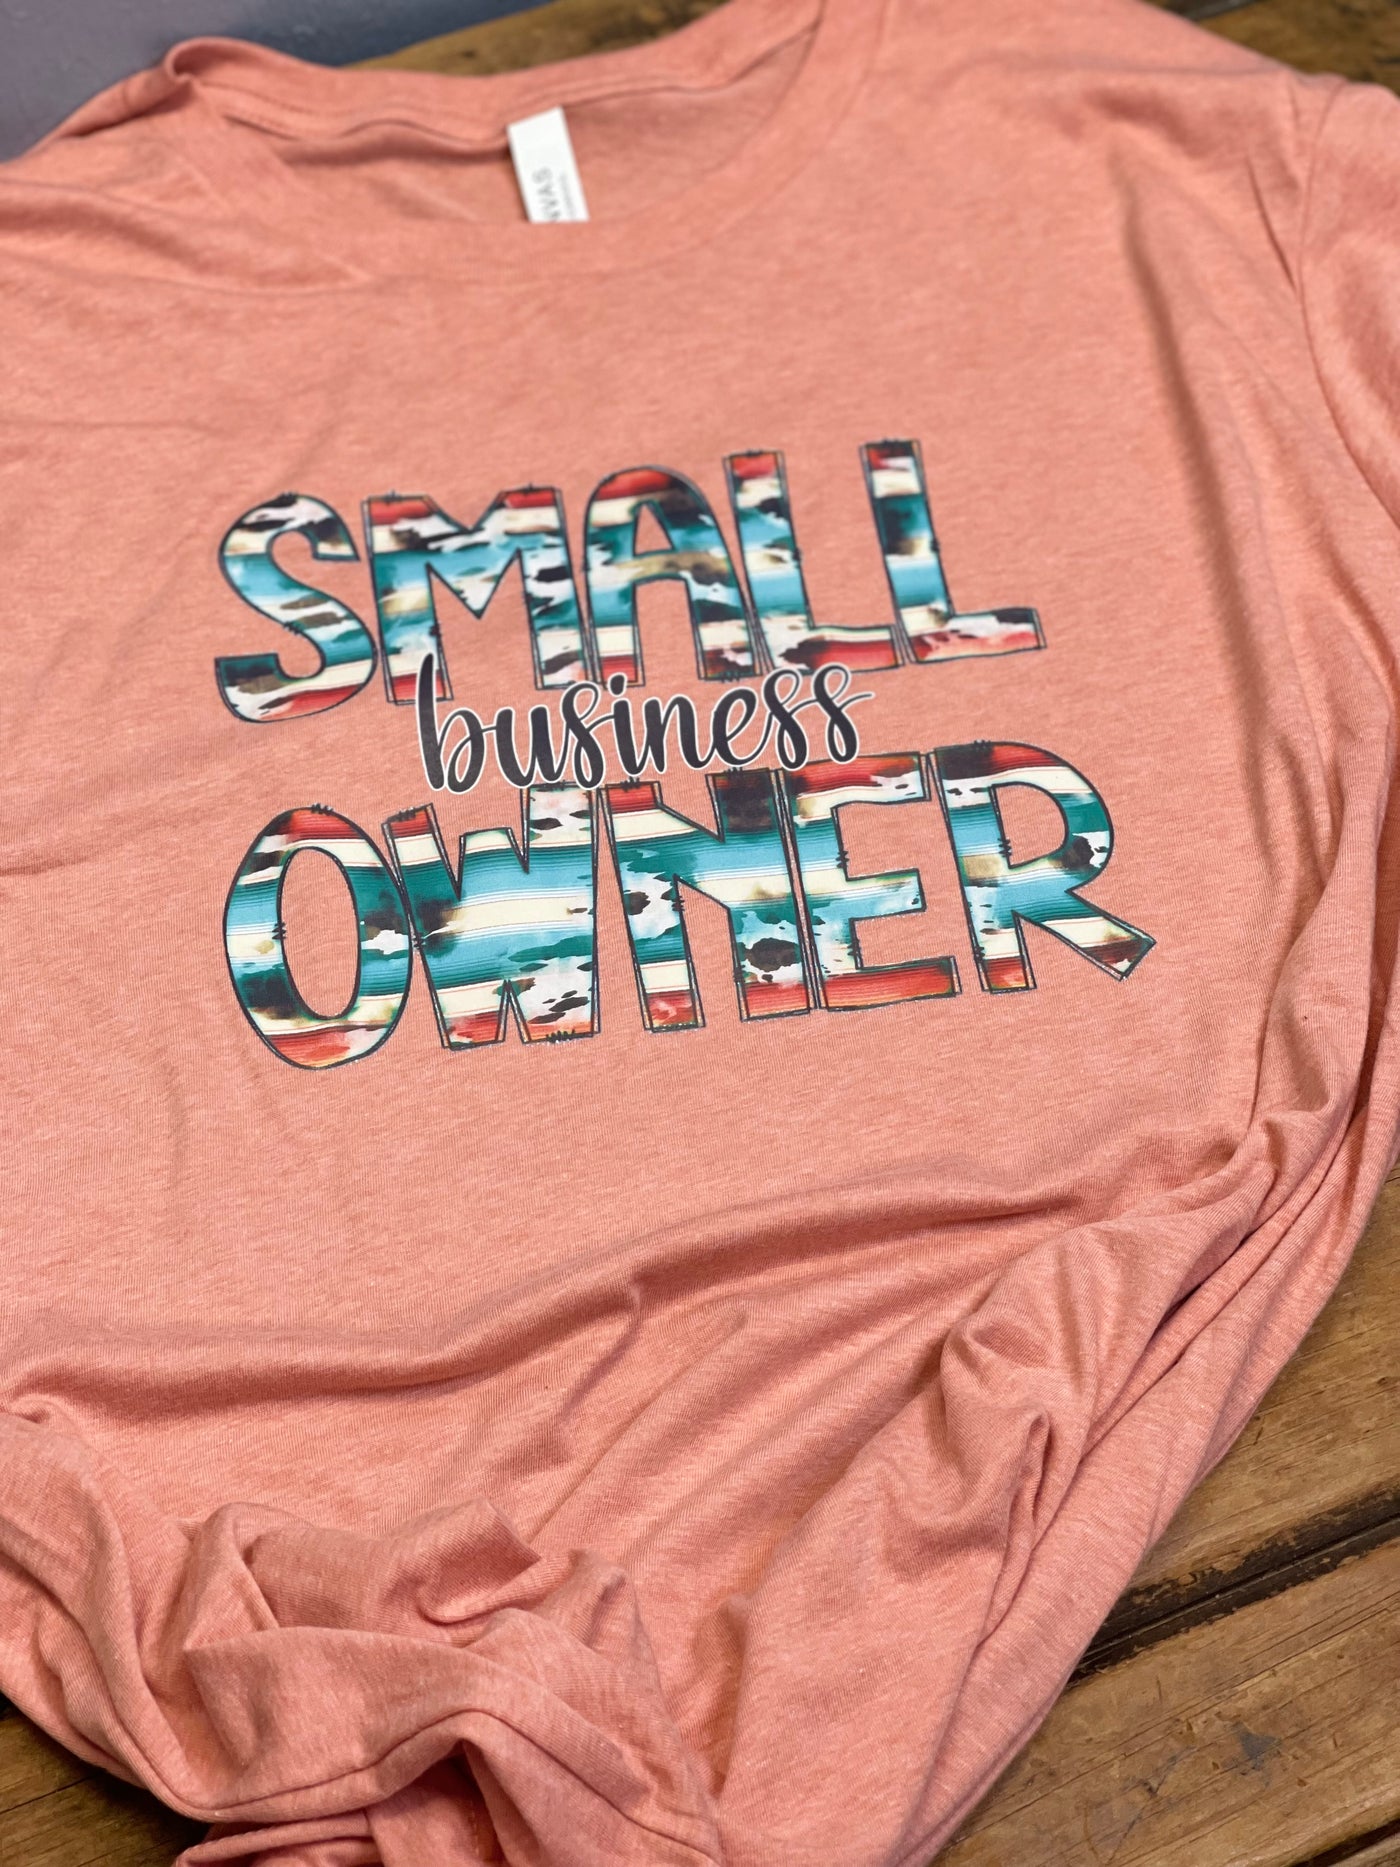 Small Business Owner Short Sleeve Graphic T-shirt